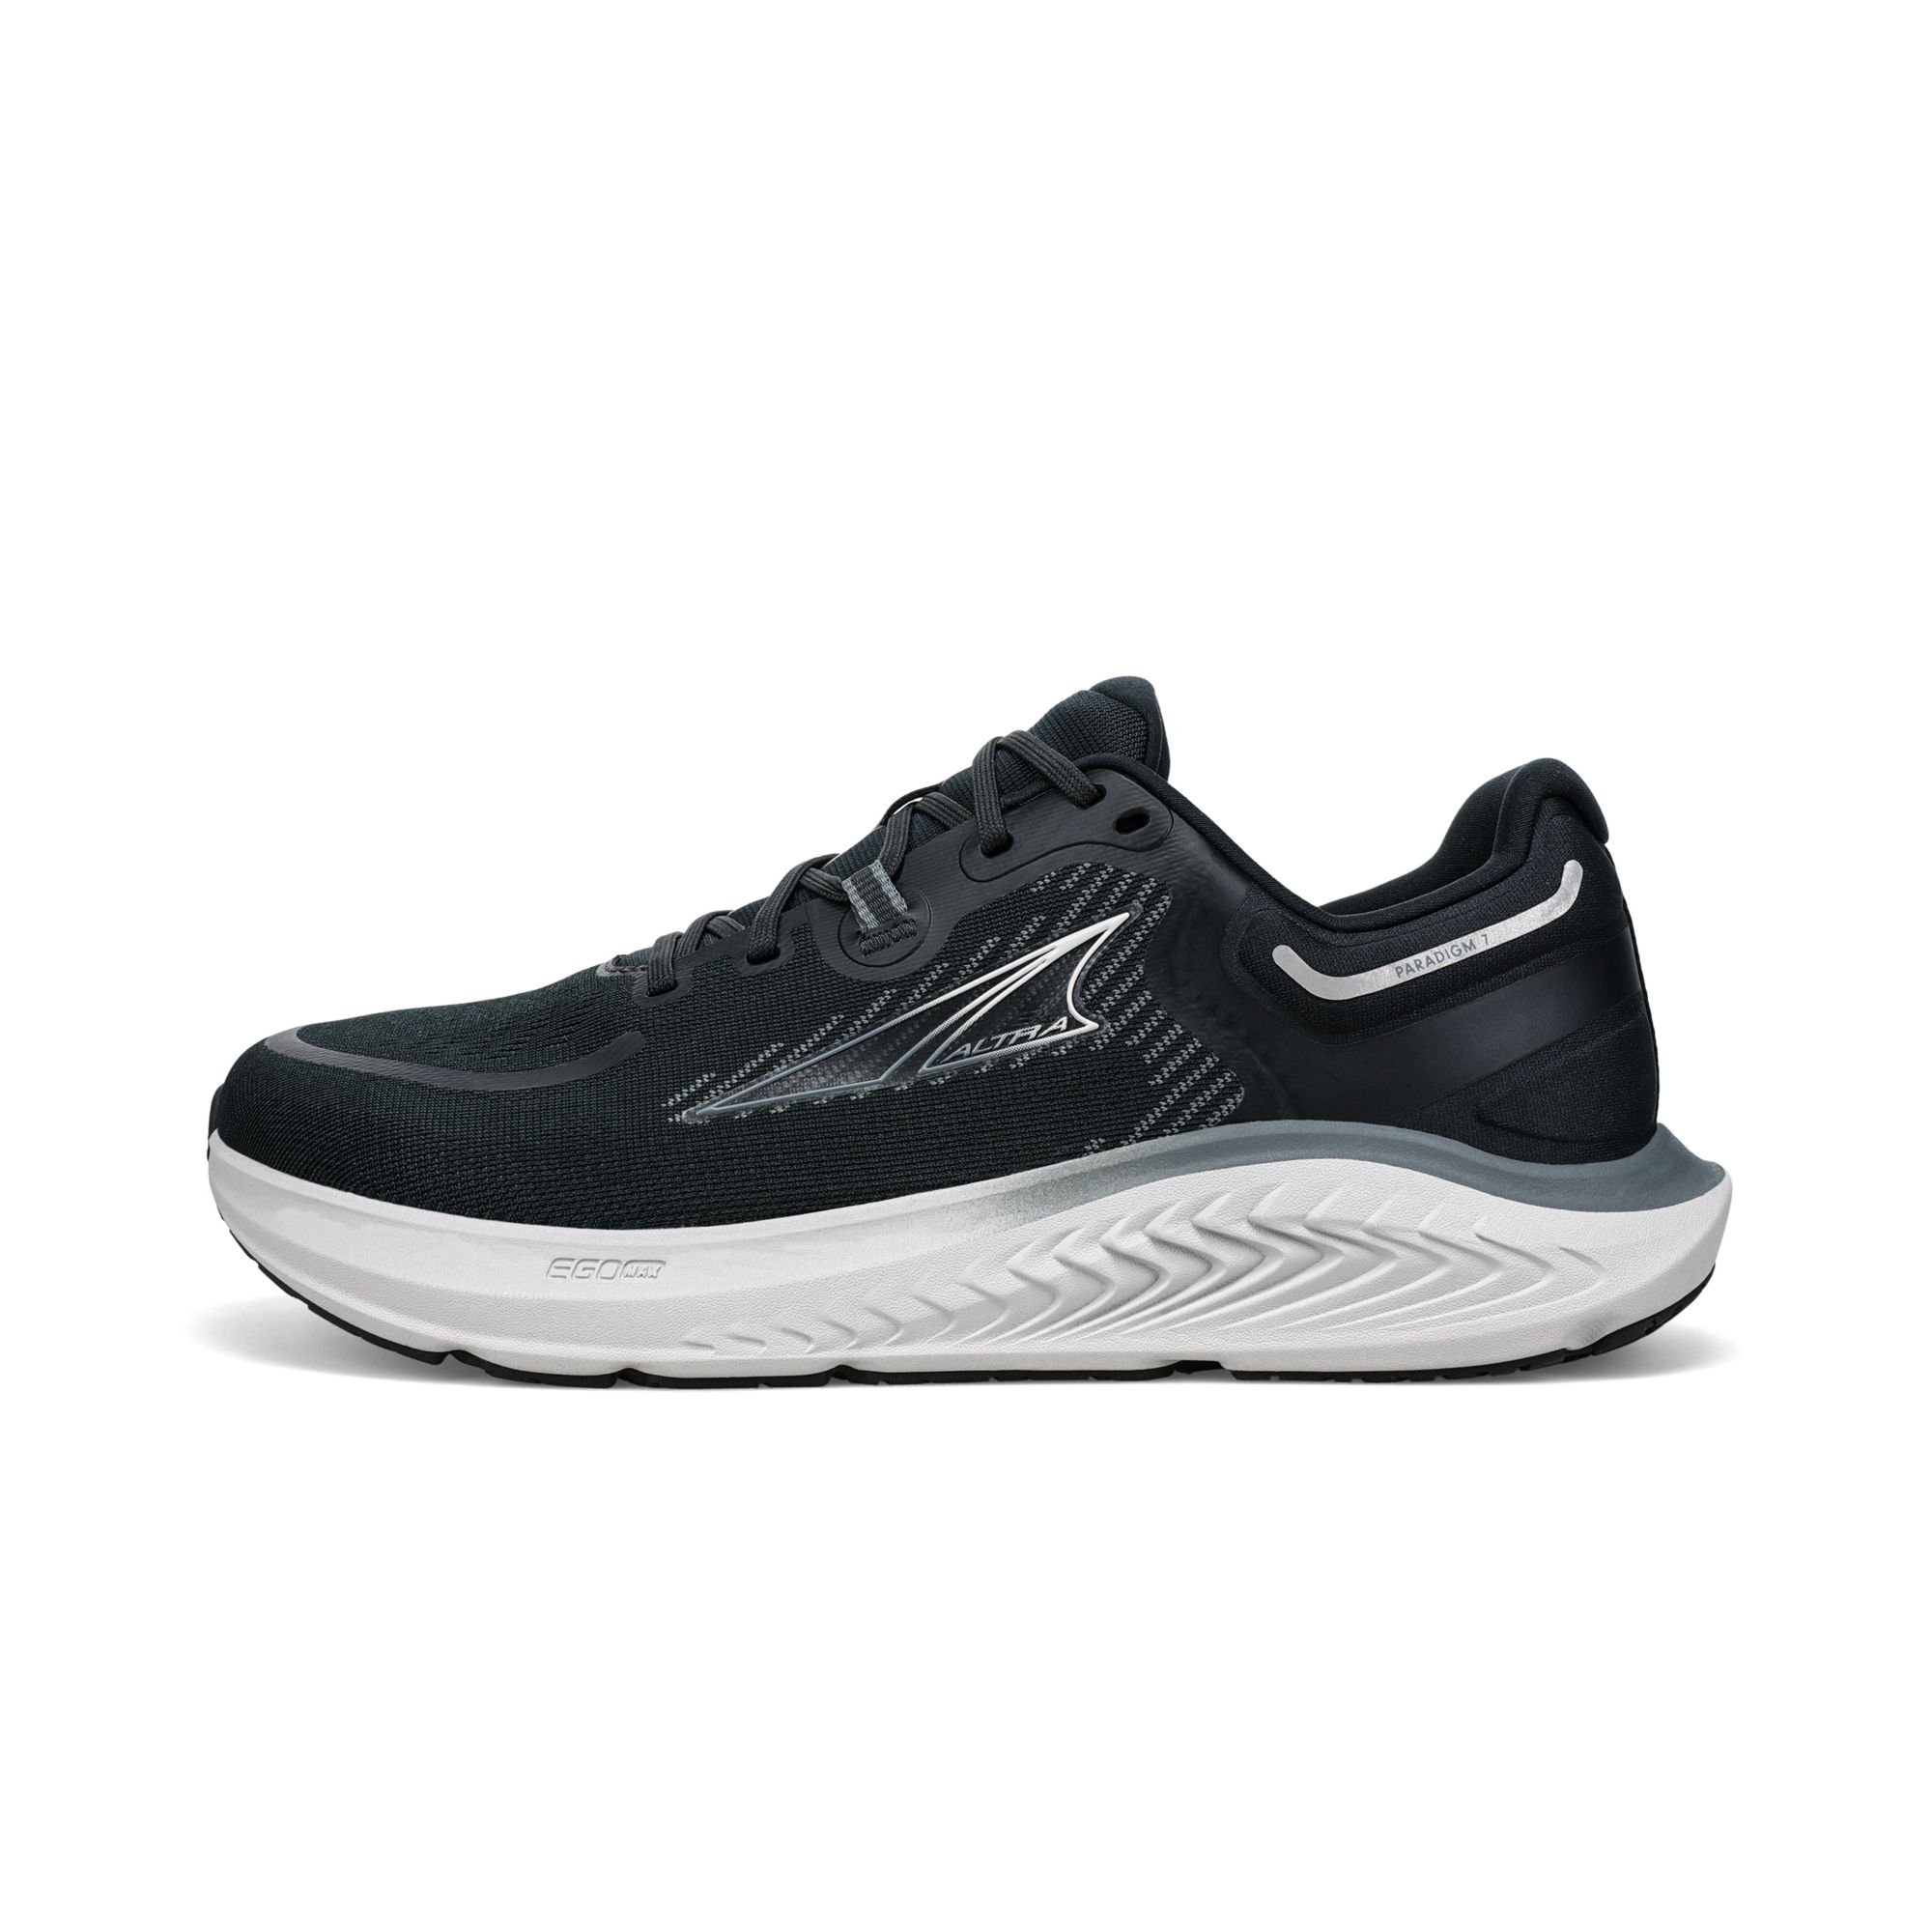 Men's Running Shoes & Athletic Sneakers | Altra® Running